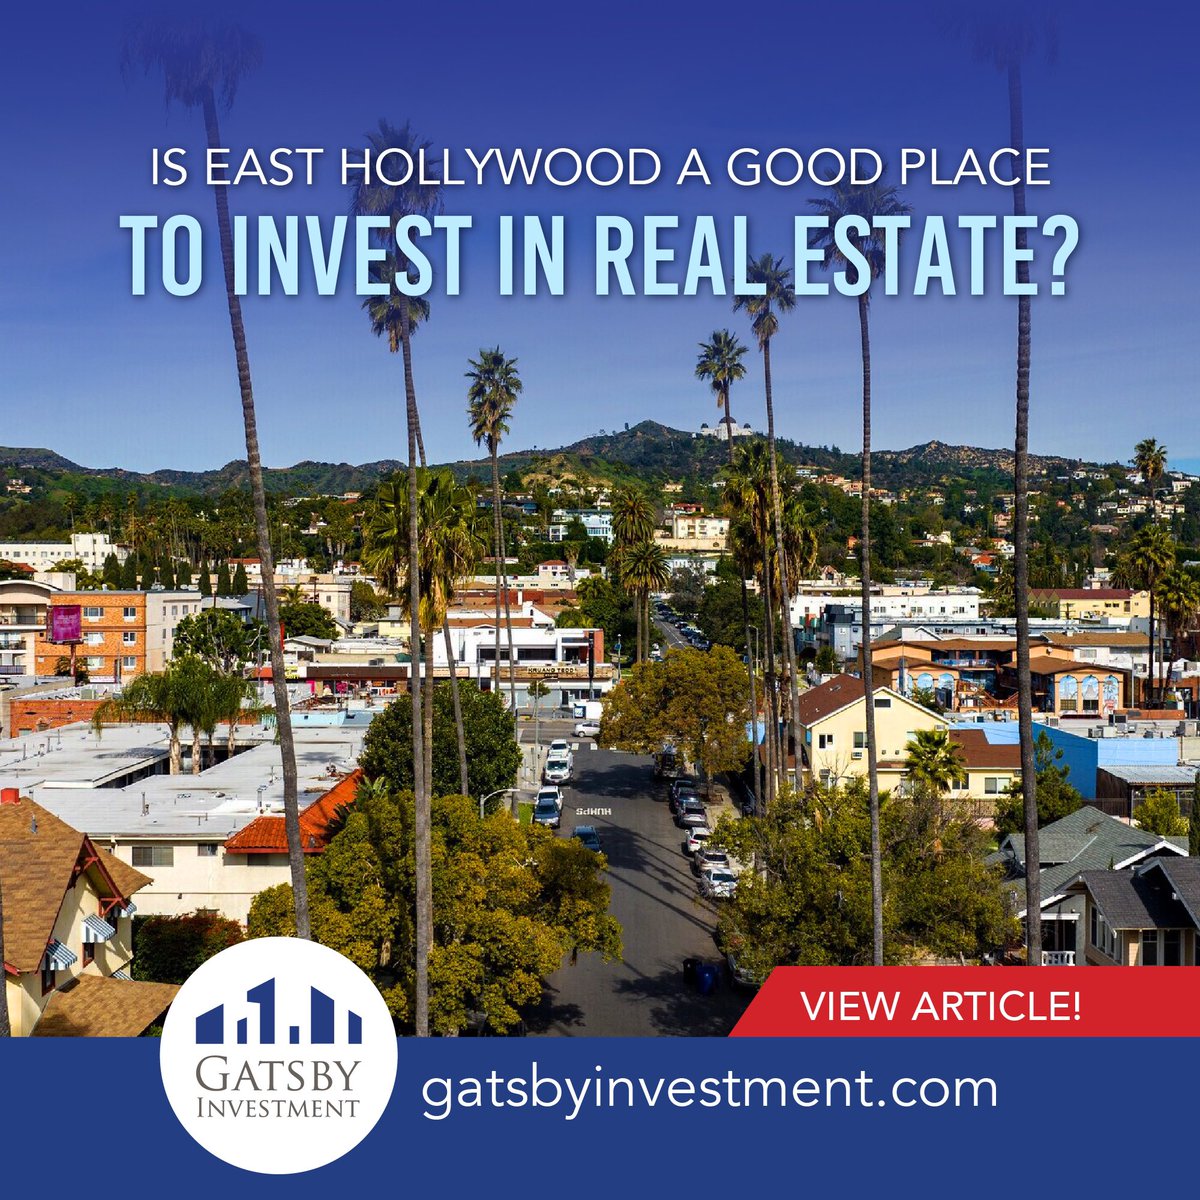 Buyer demand is cooling in East Hollywood. But the rental market saw double-digit gains this year. So should you invest in East Hollywood housing? Let’s look at the data…

Click the link to learn more:
gatsbyinvestment.com/education-cent…

#easthollywood #easthollywoodrealestate…